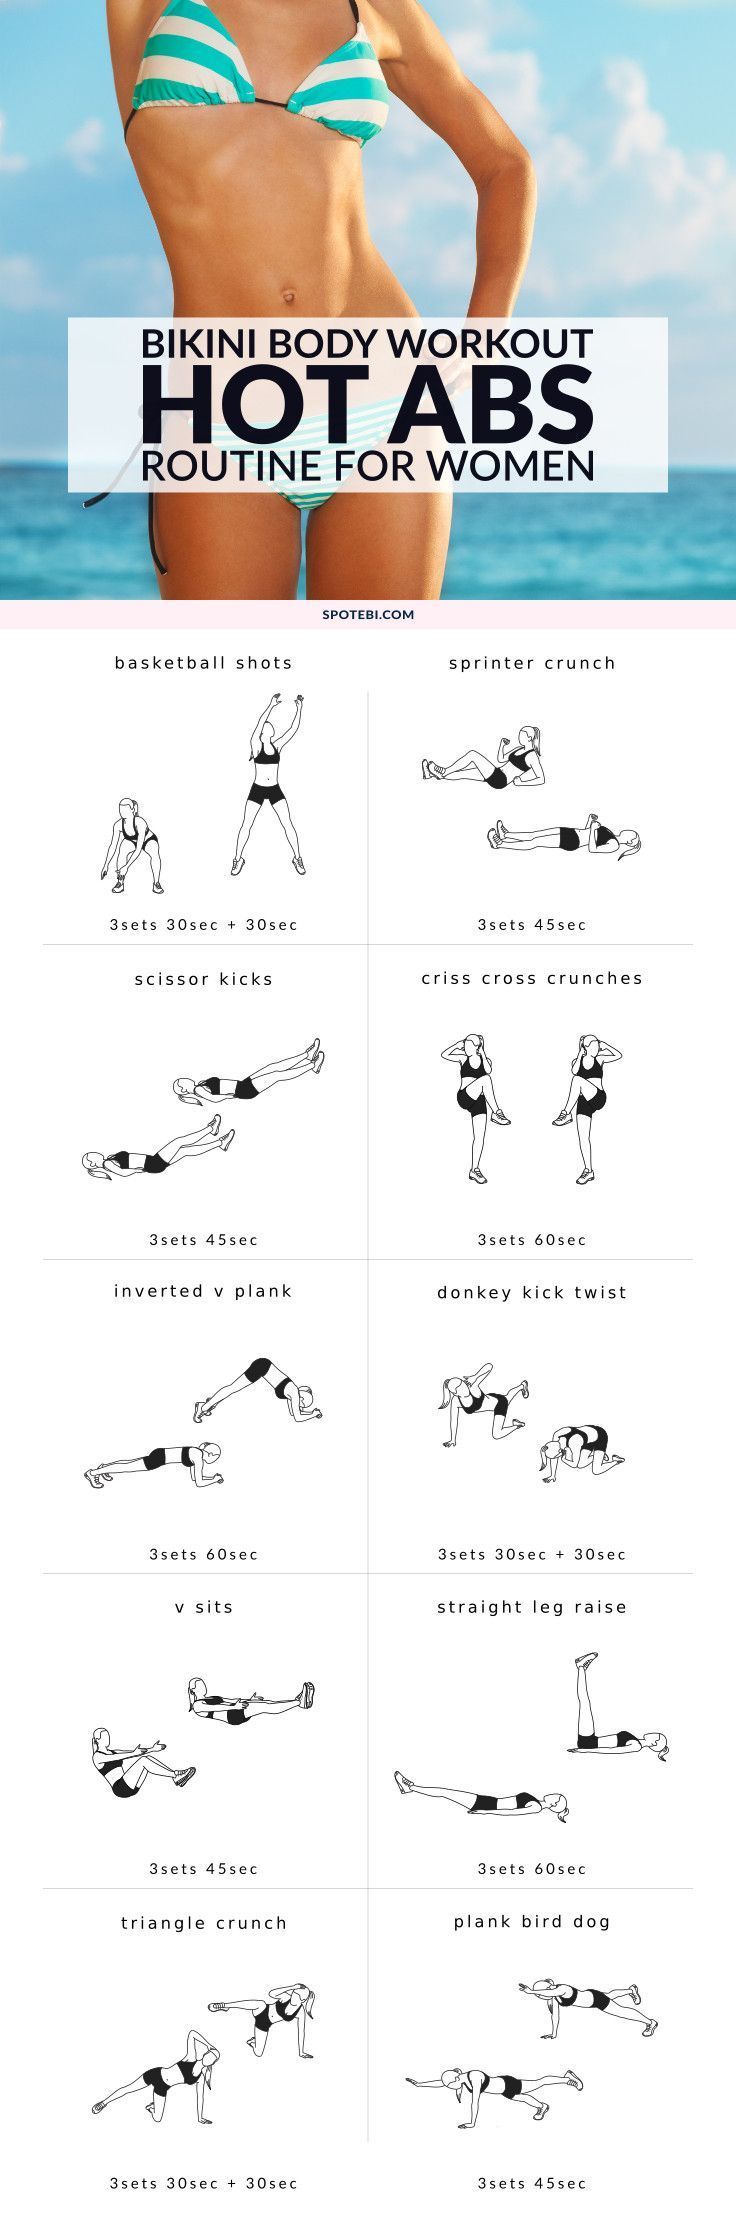 Trim, tone and sculpt your entire core with this 30 minute Ab Workout Routine…